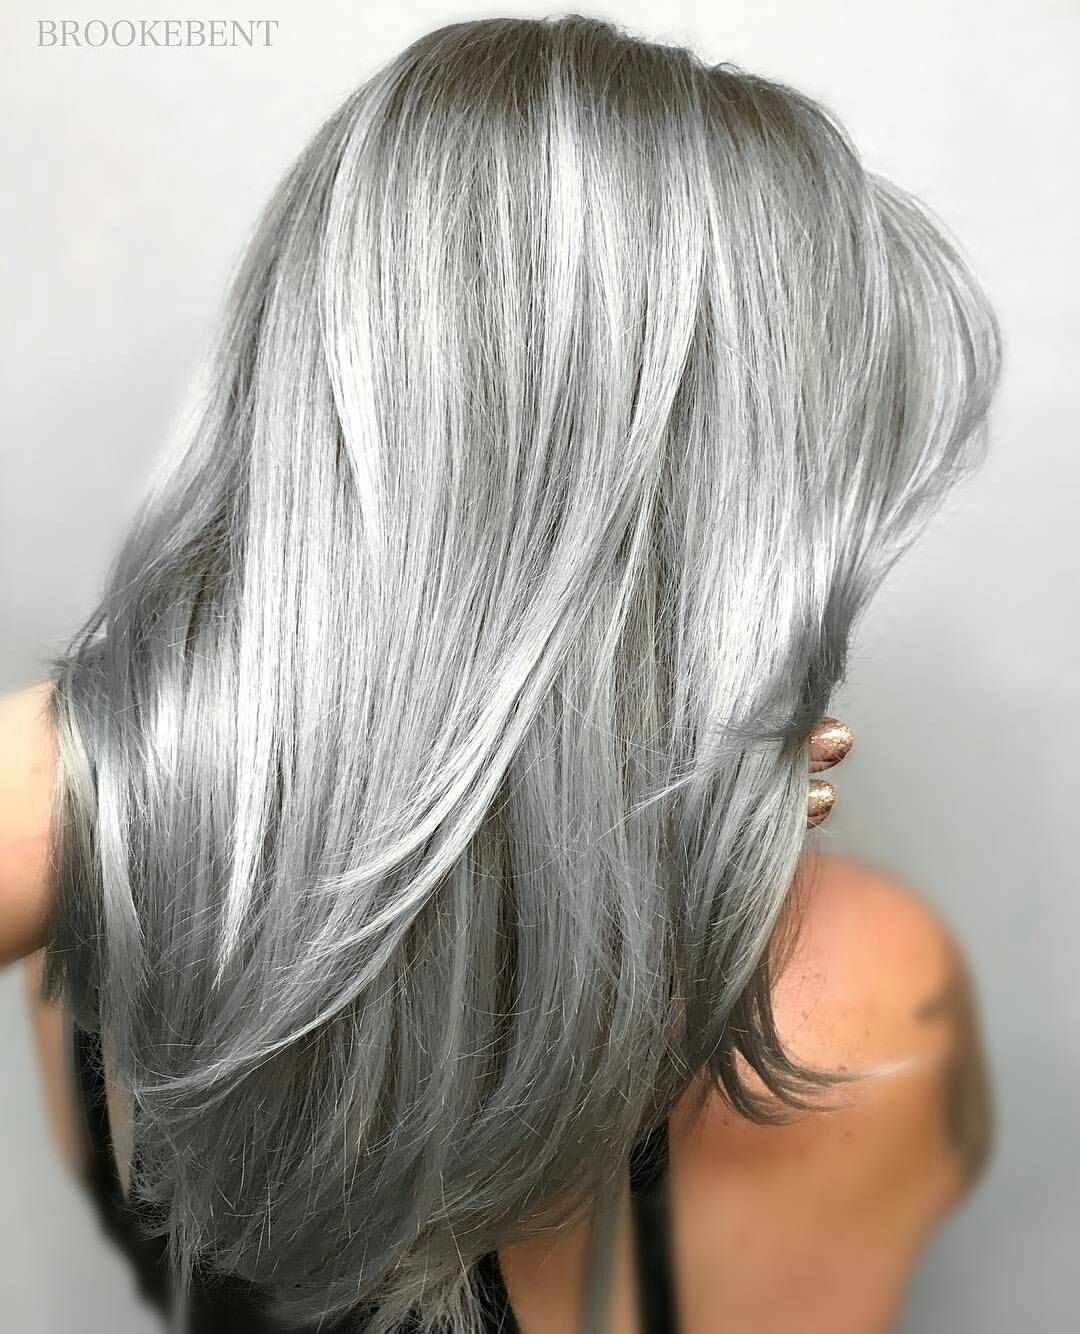 33 Gorgeous Gray Hair Styles You Will Love – Page 2 – Eazy Glam